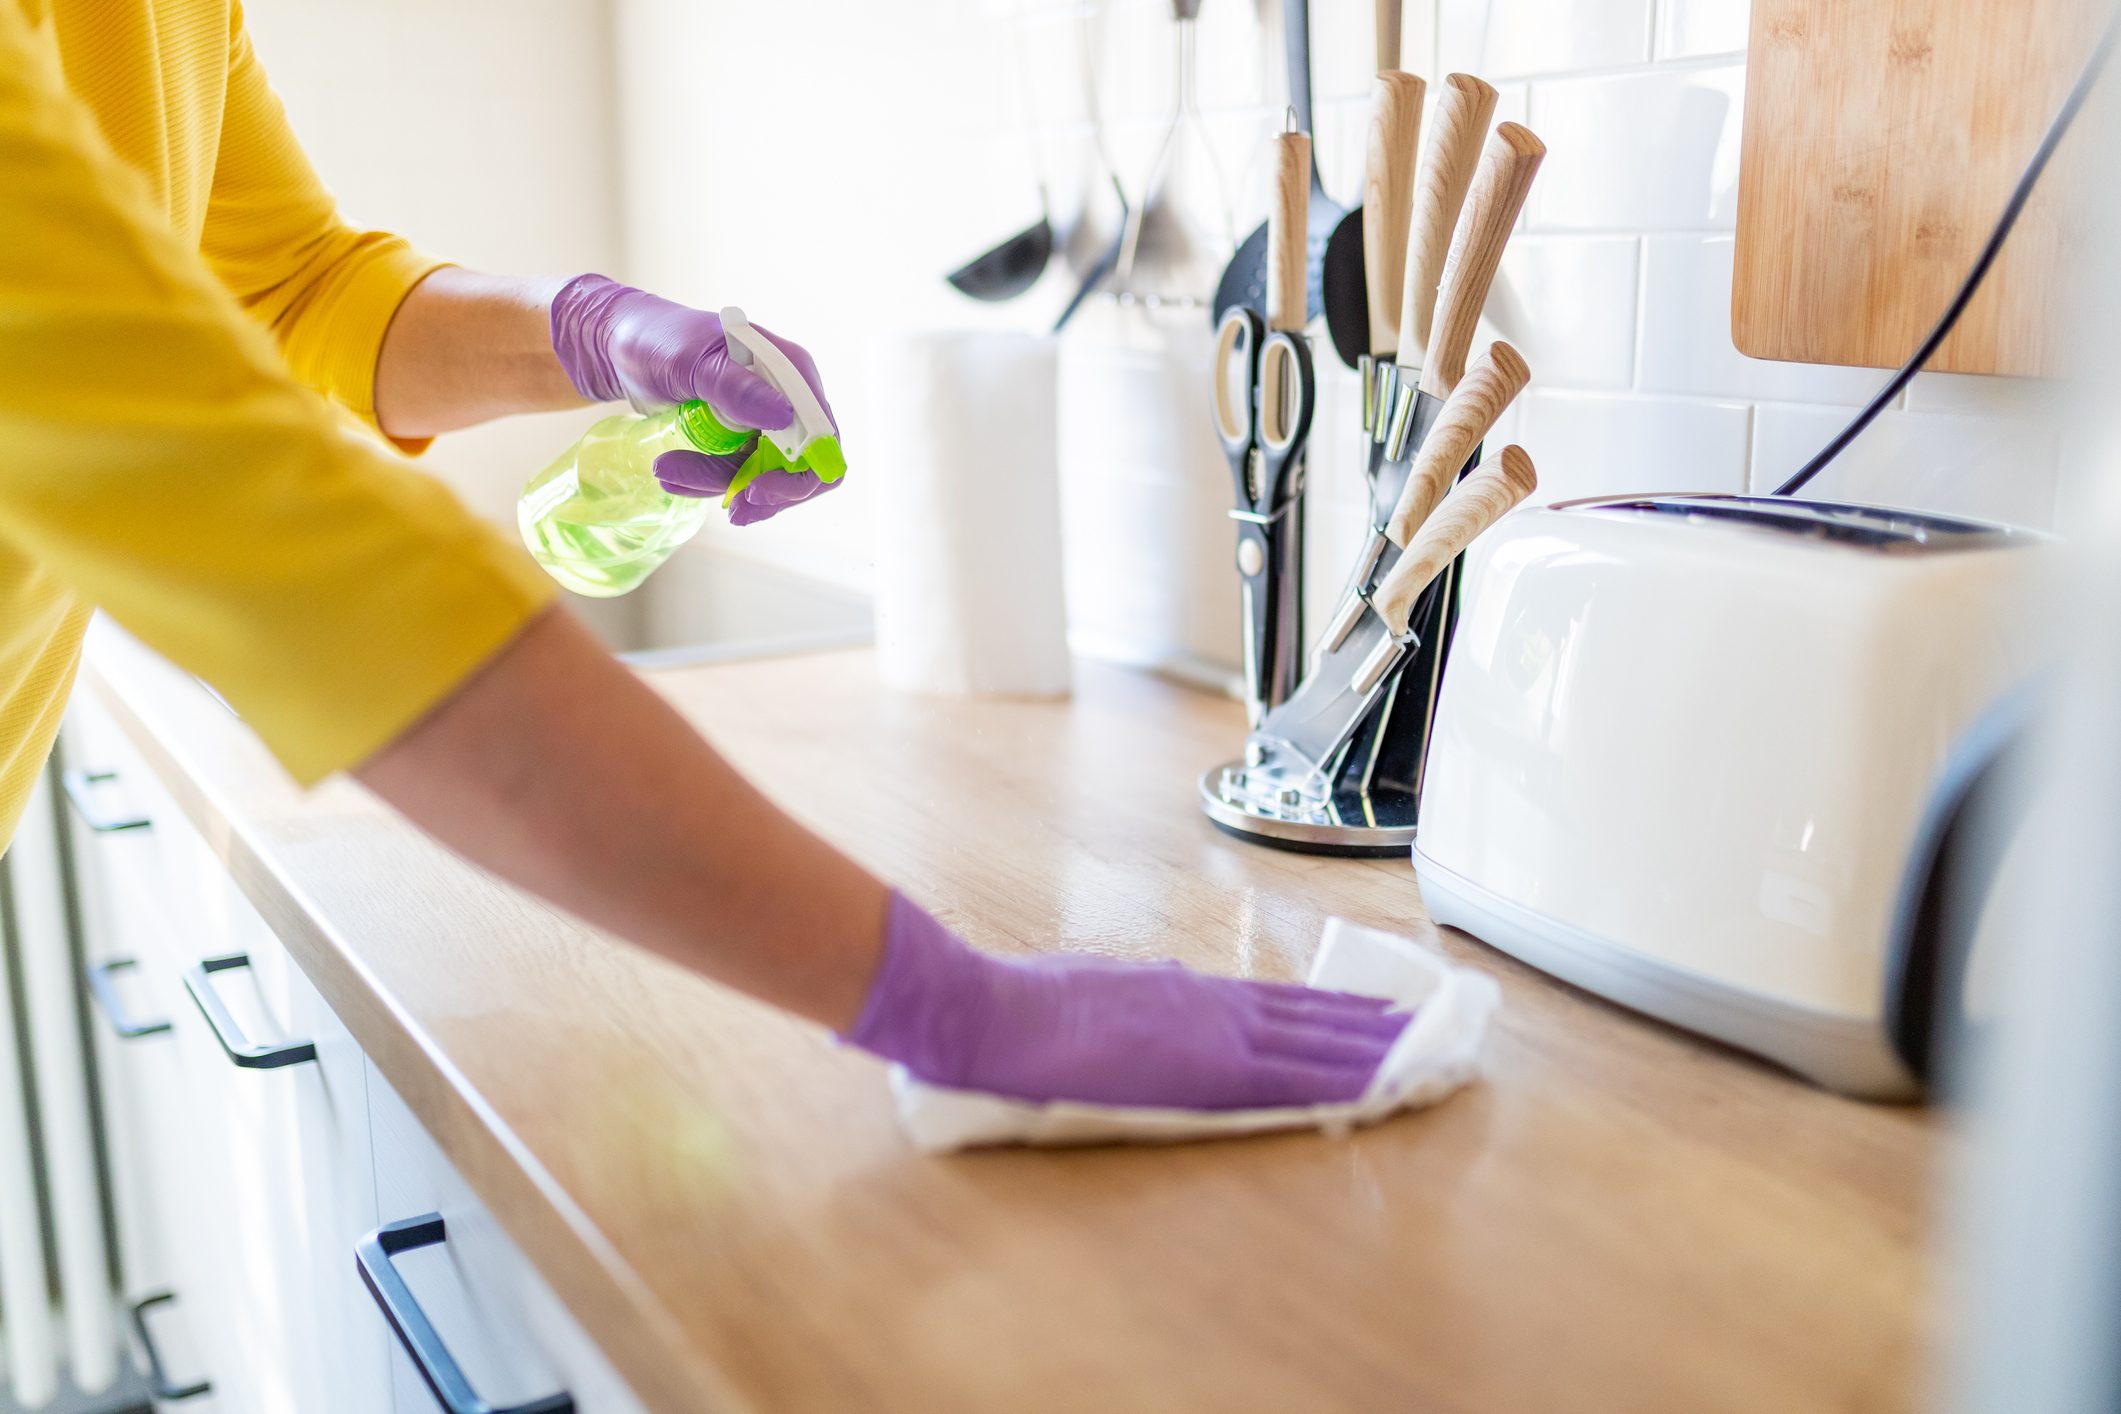 Simple Home Cleaning Tips: 5 Kitchen Cleaning Hacks & Gadgets You Need to  Know About, Home